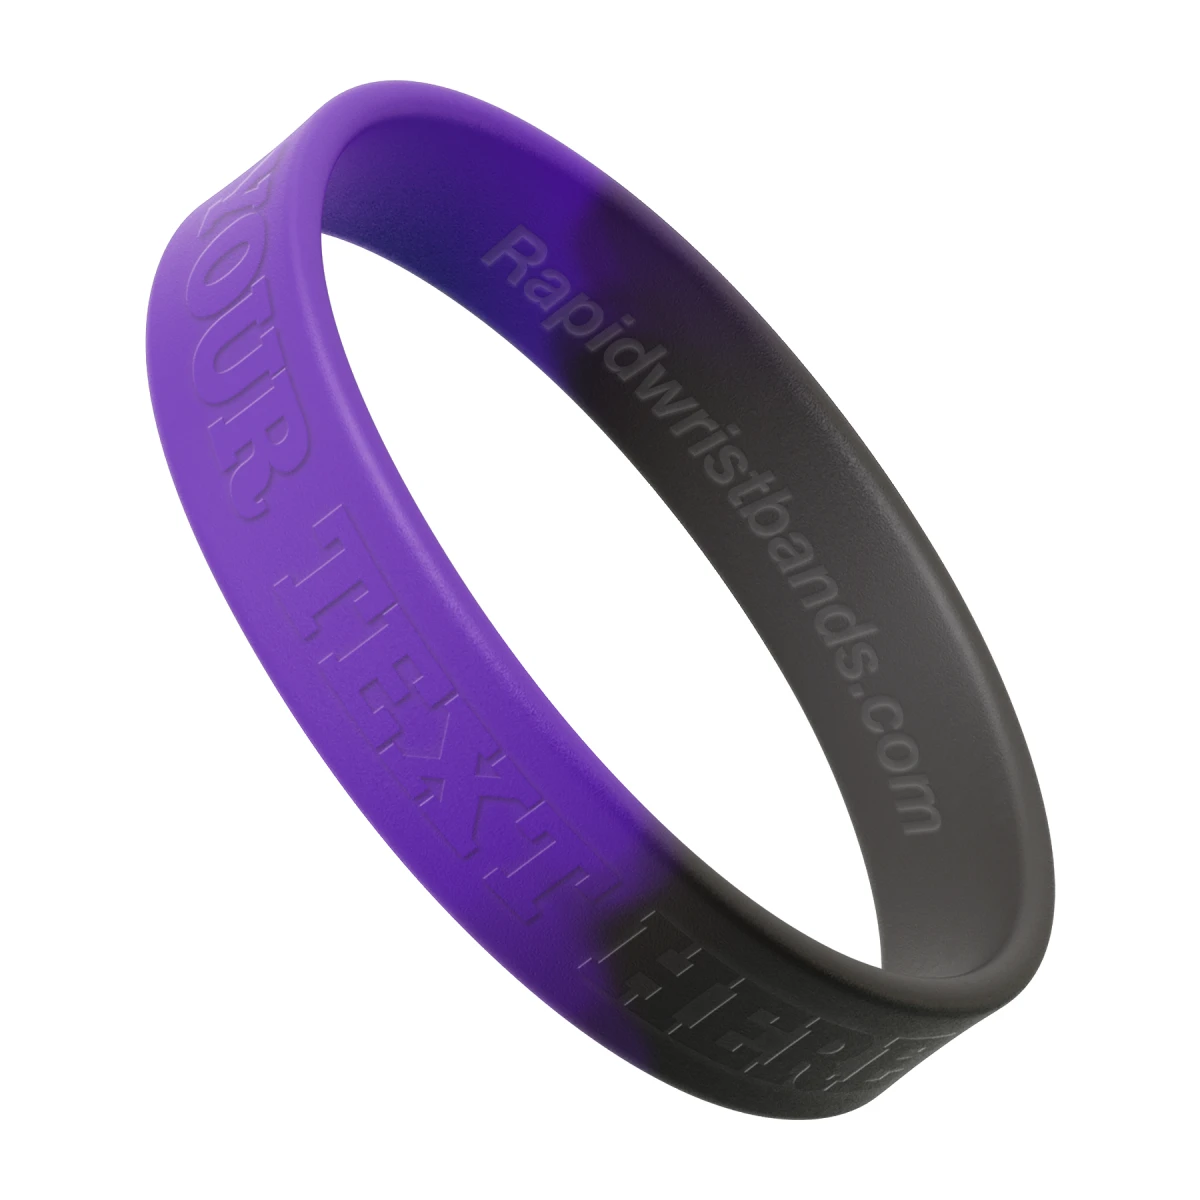 Segmented Purple/Black Wristband With Your Text Here Embossed